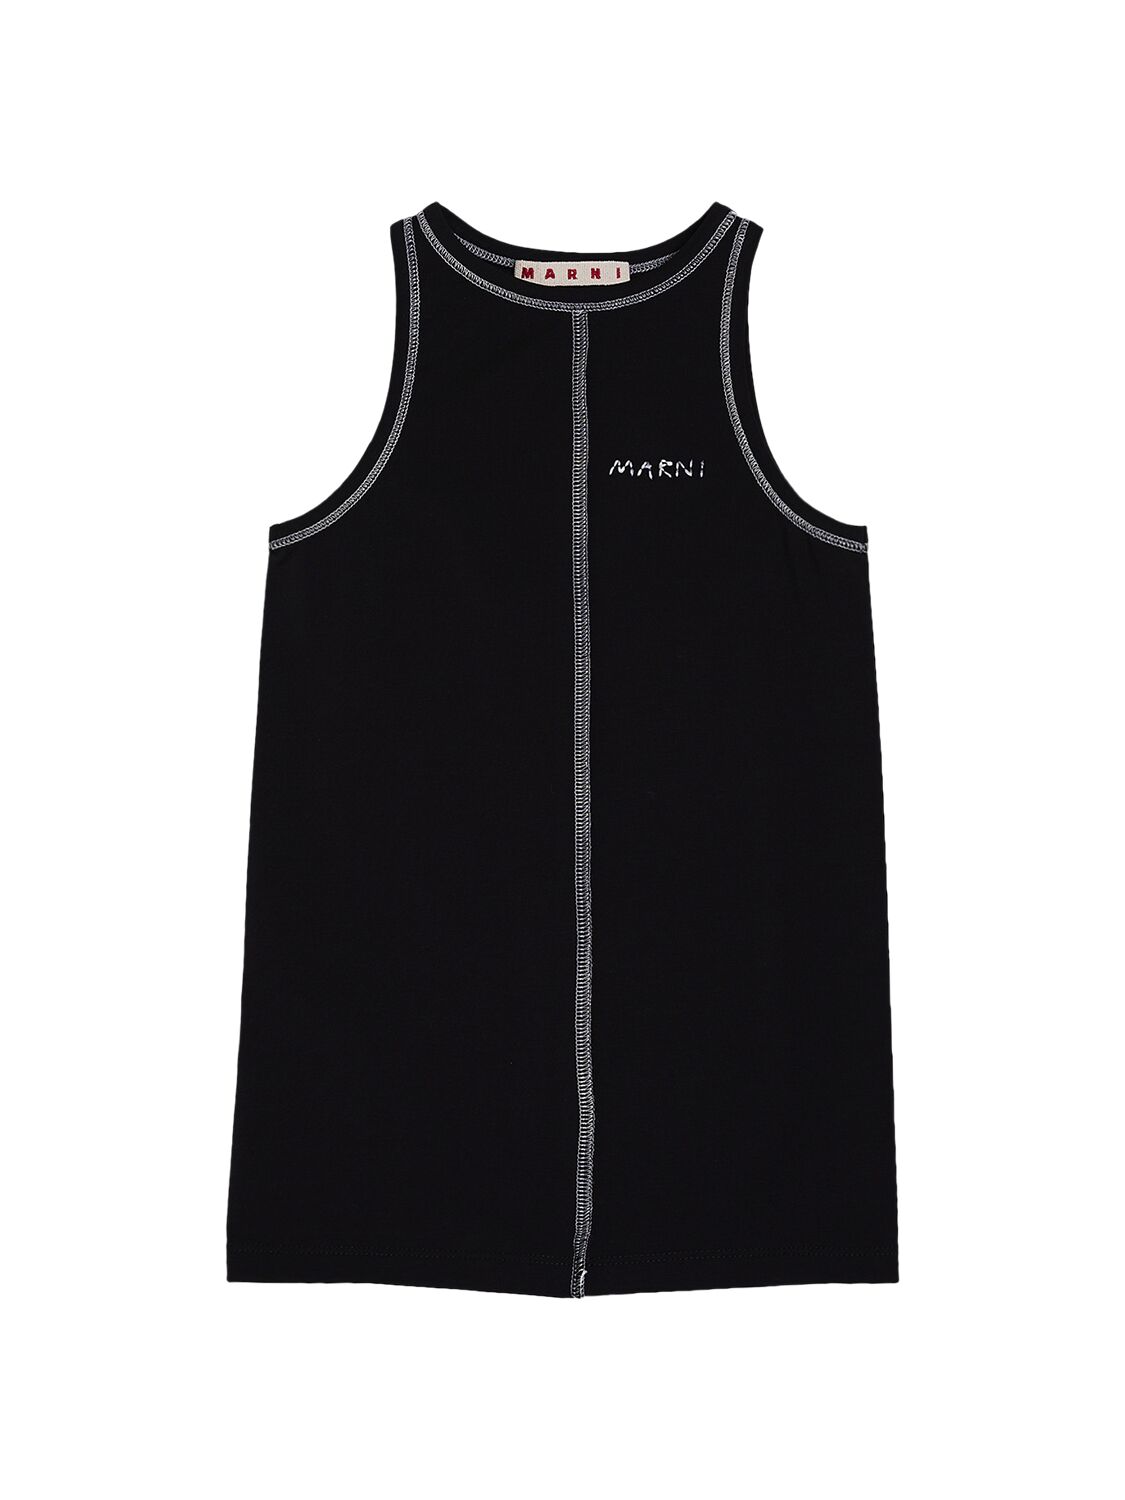 Image of Cotton Jersey Tank Top